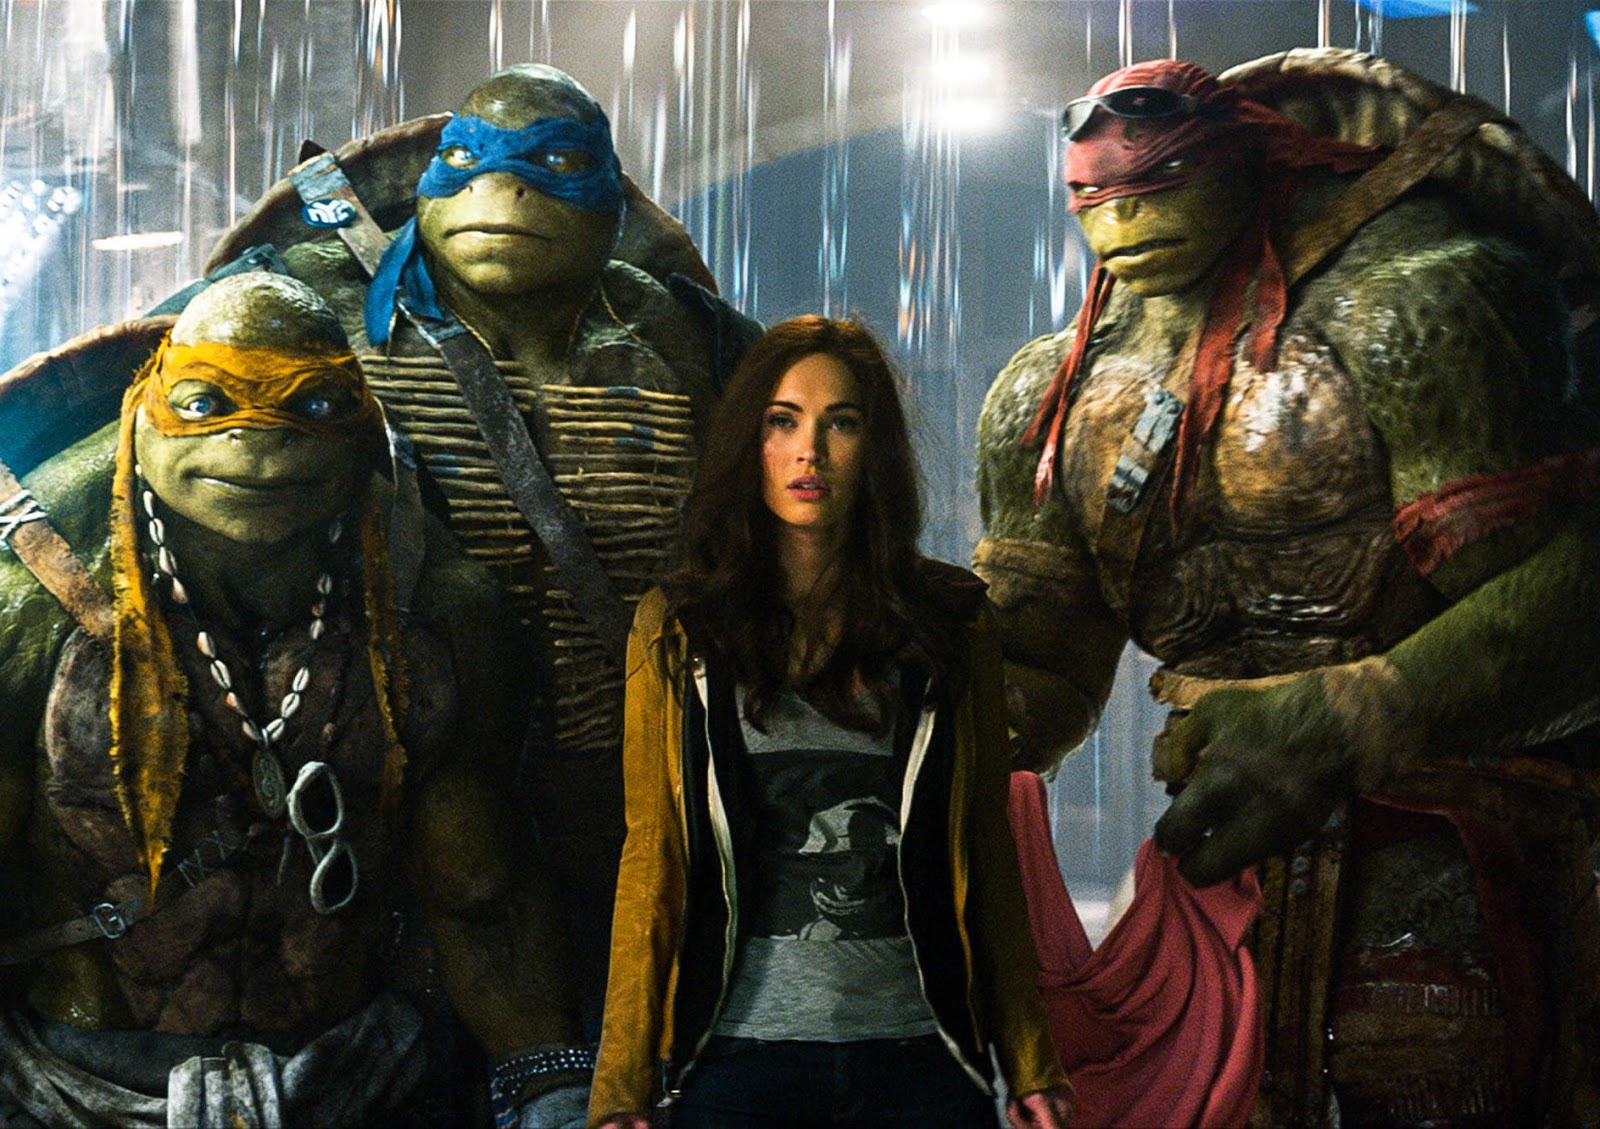 All you need to know about the Teenage Mutant Ninja Turtles franchise